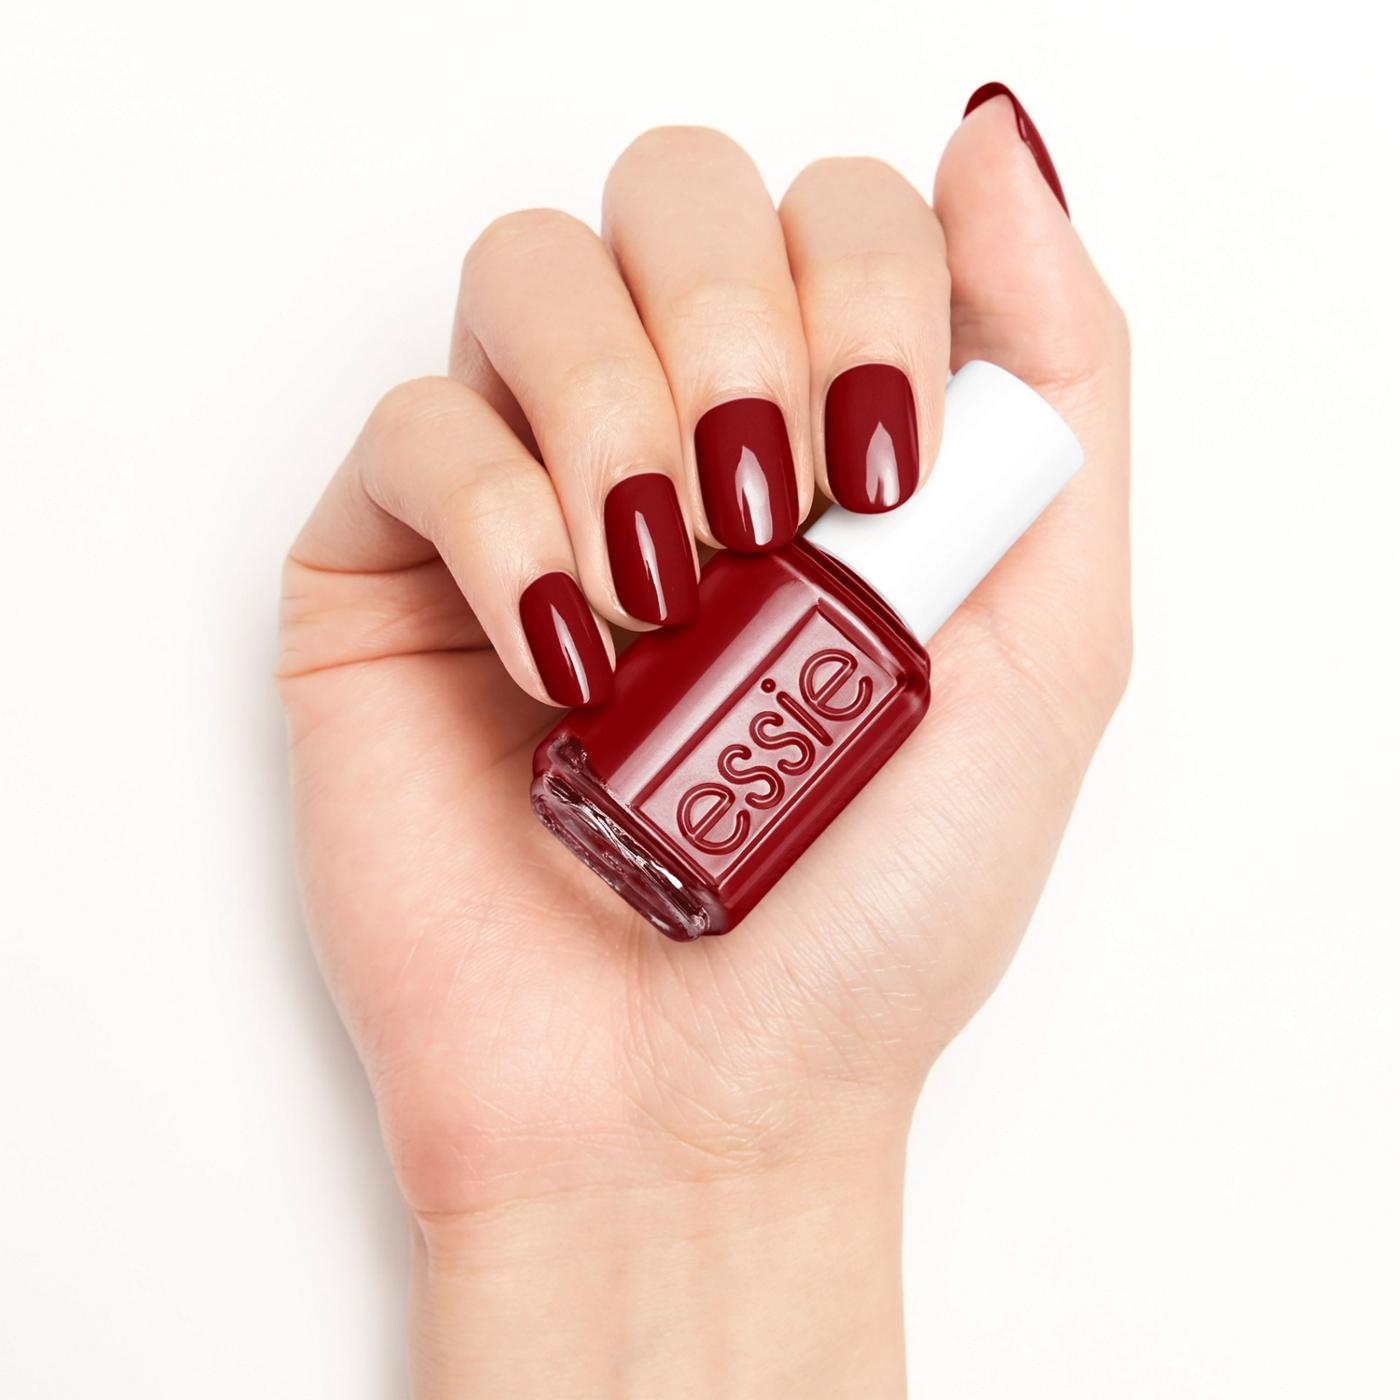 essie Nail Polish - Not A Phase; image 6 of 8